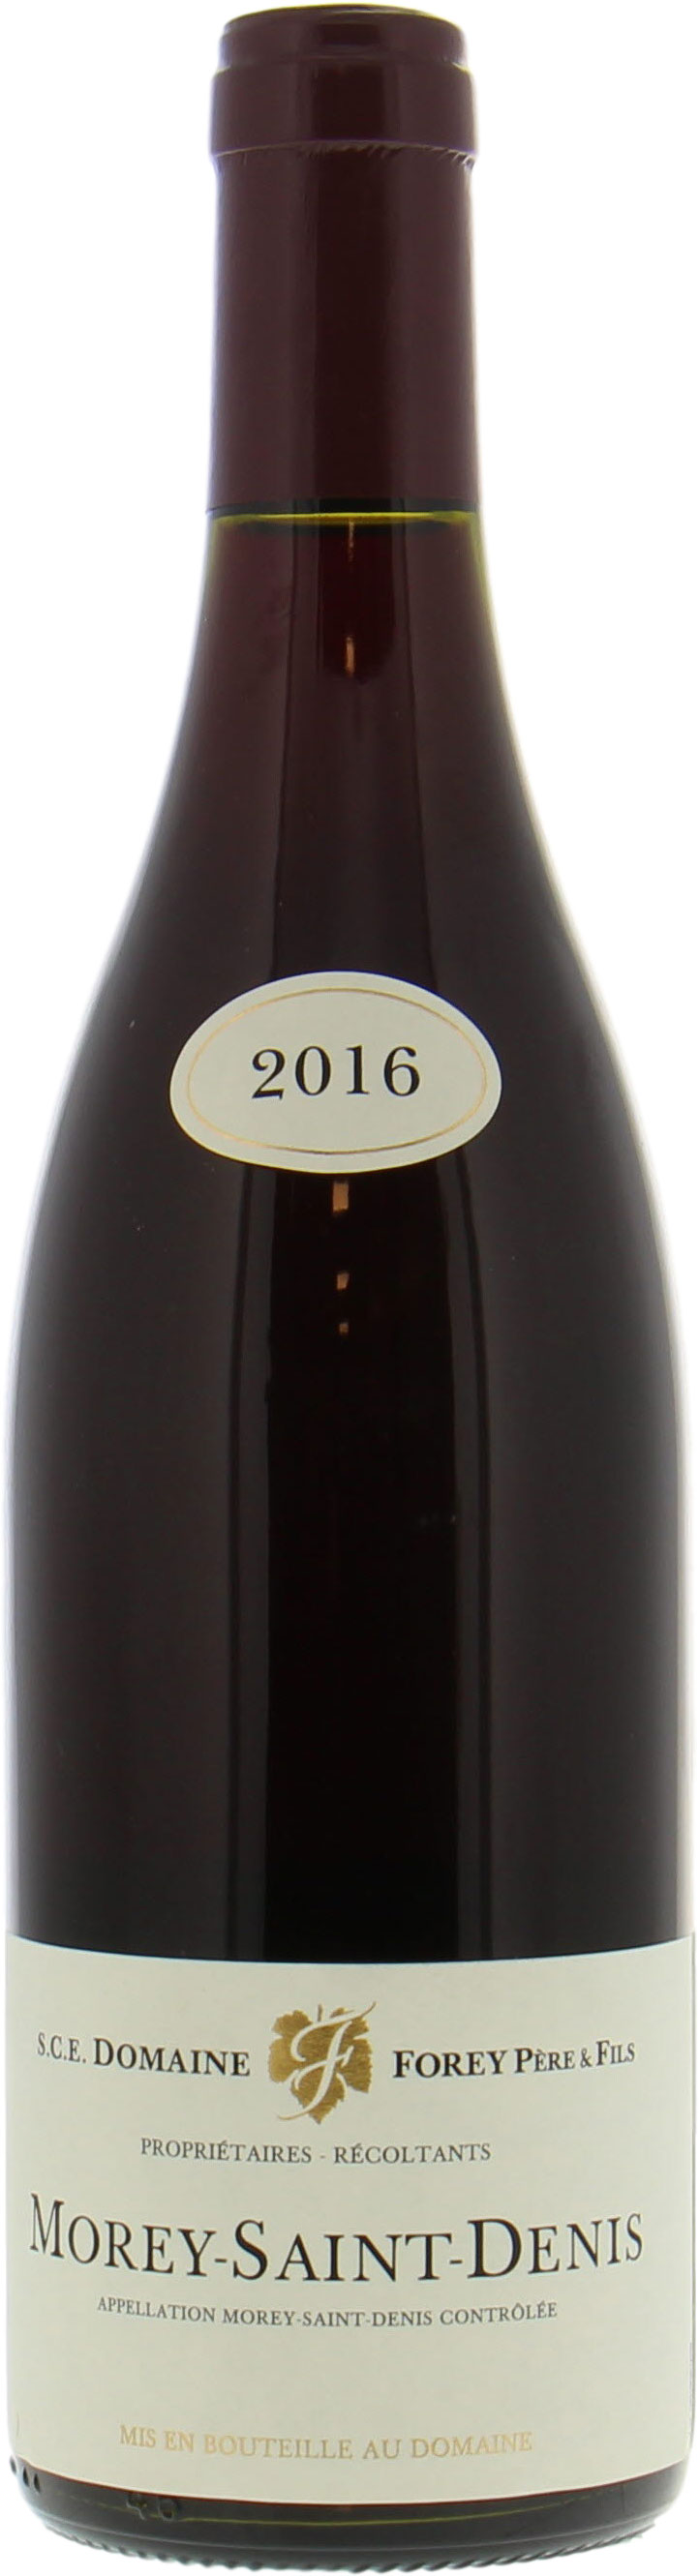 Domaine Forey Pere & Fils - Morey St. Denis 2016 Perfect